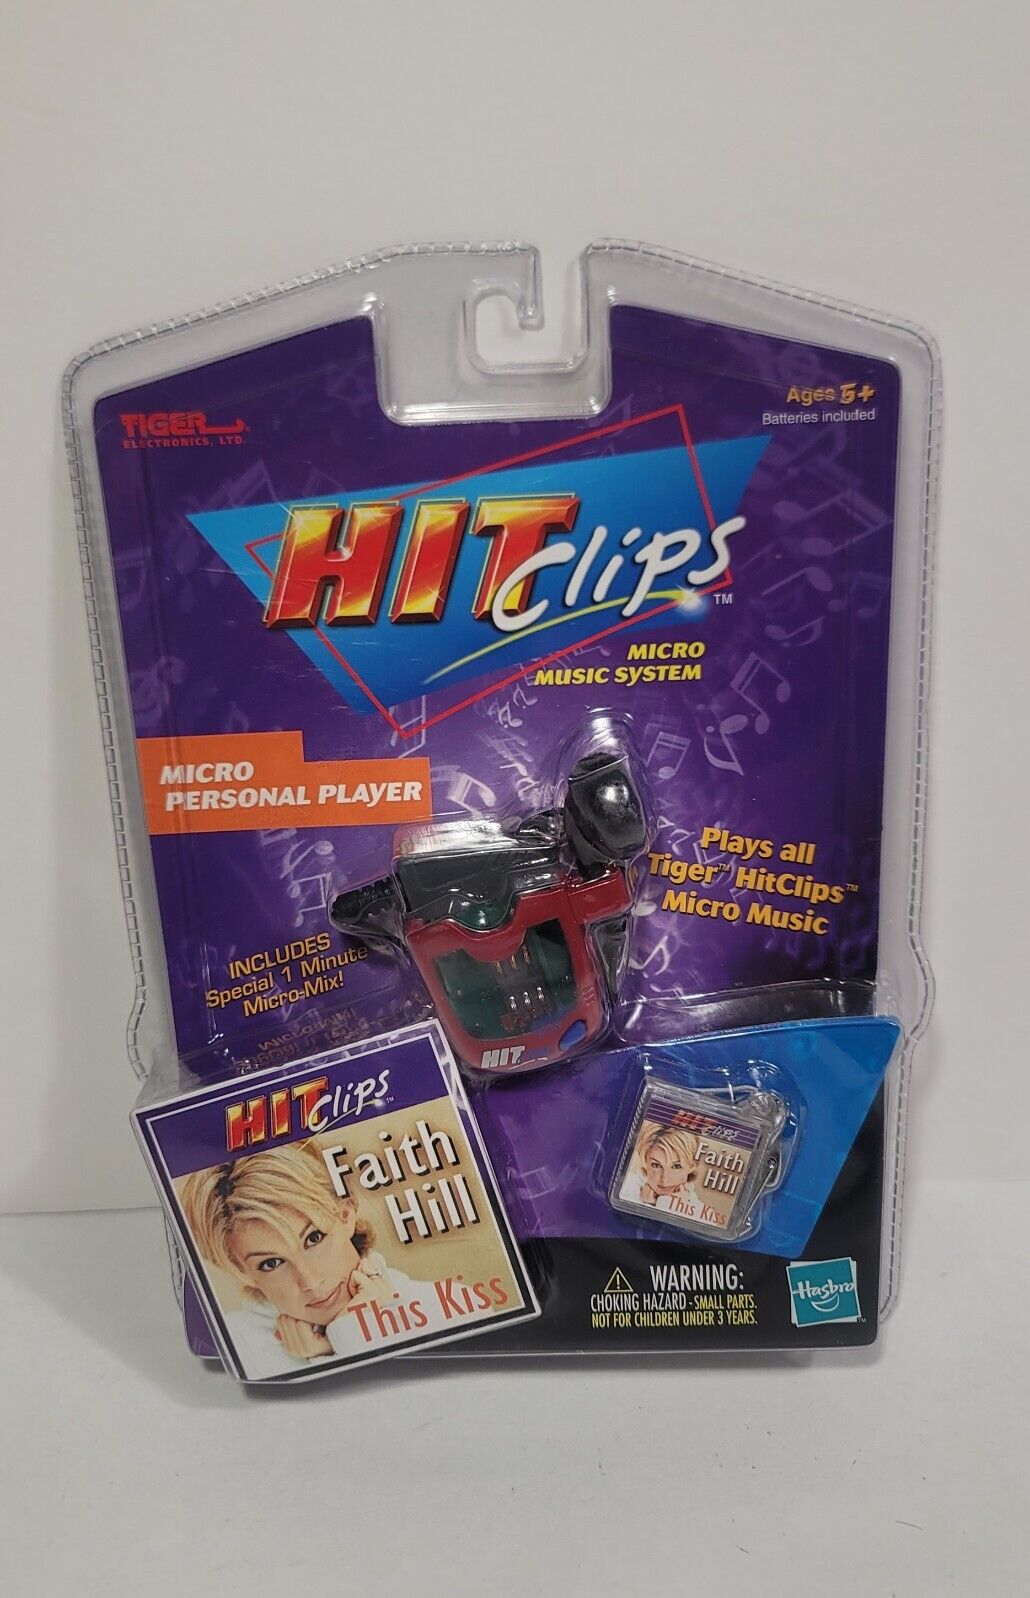 New vintage tiger Hit Clips Micro System Music Player Faith Hill This Kiss